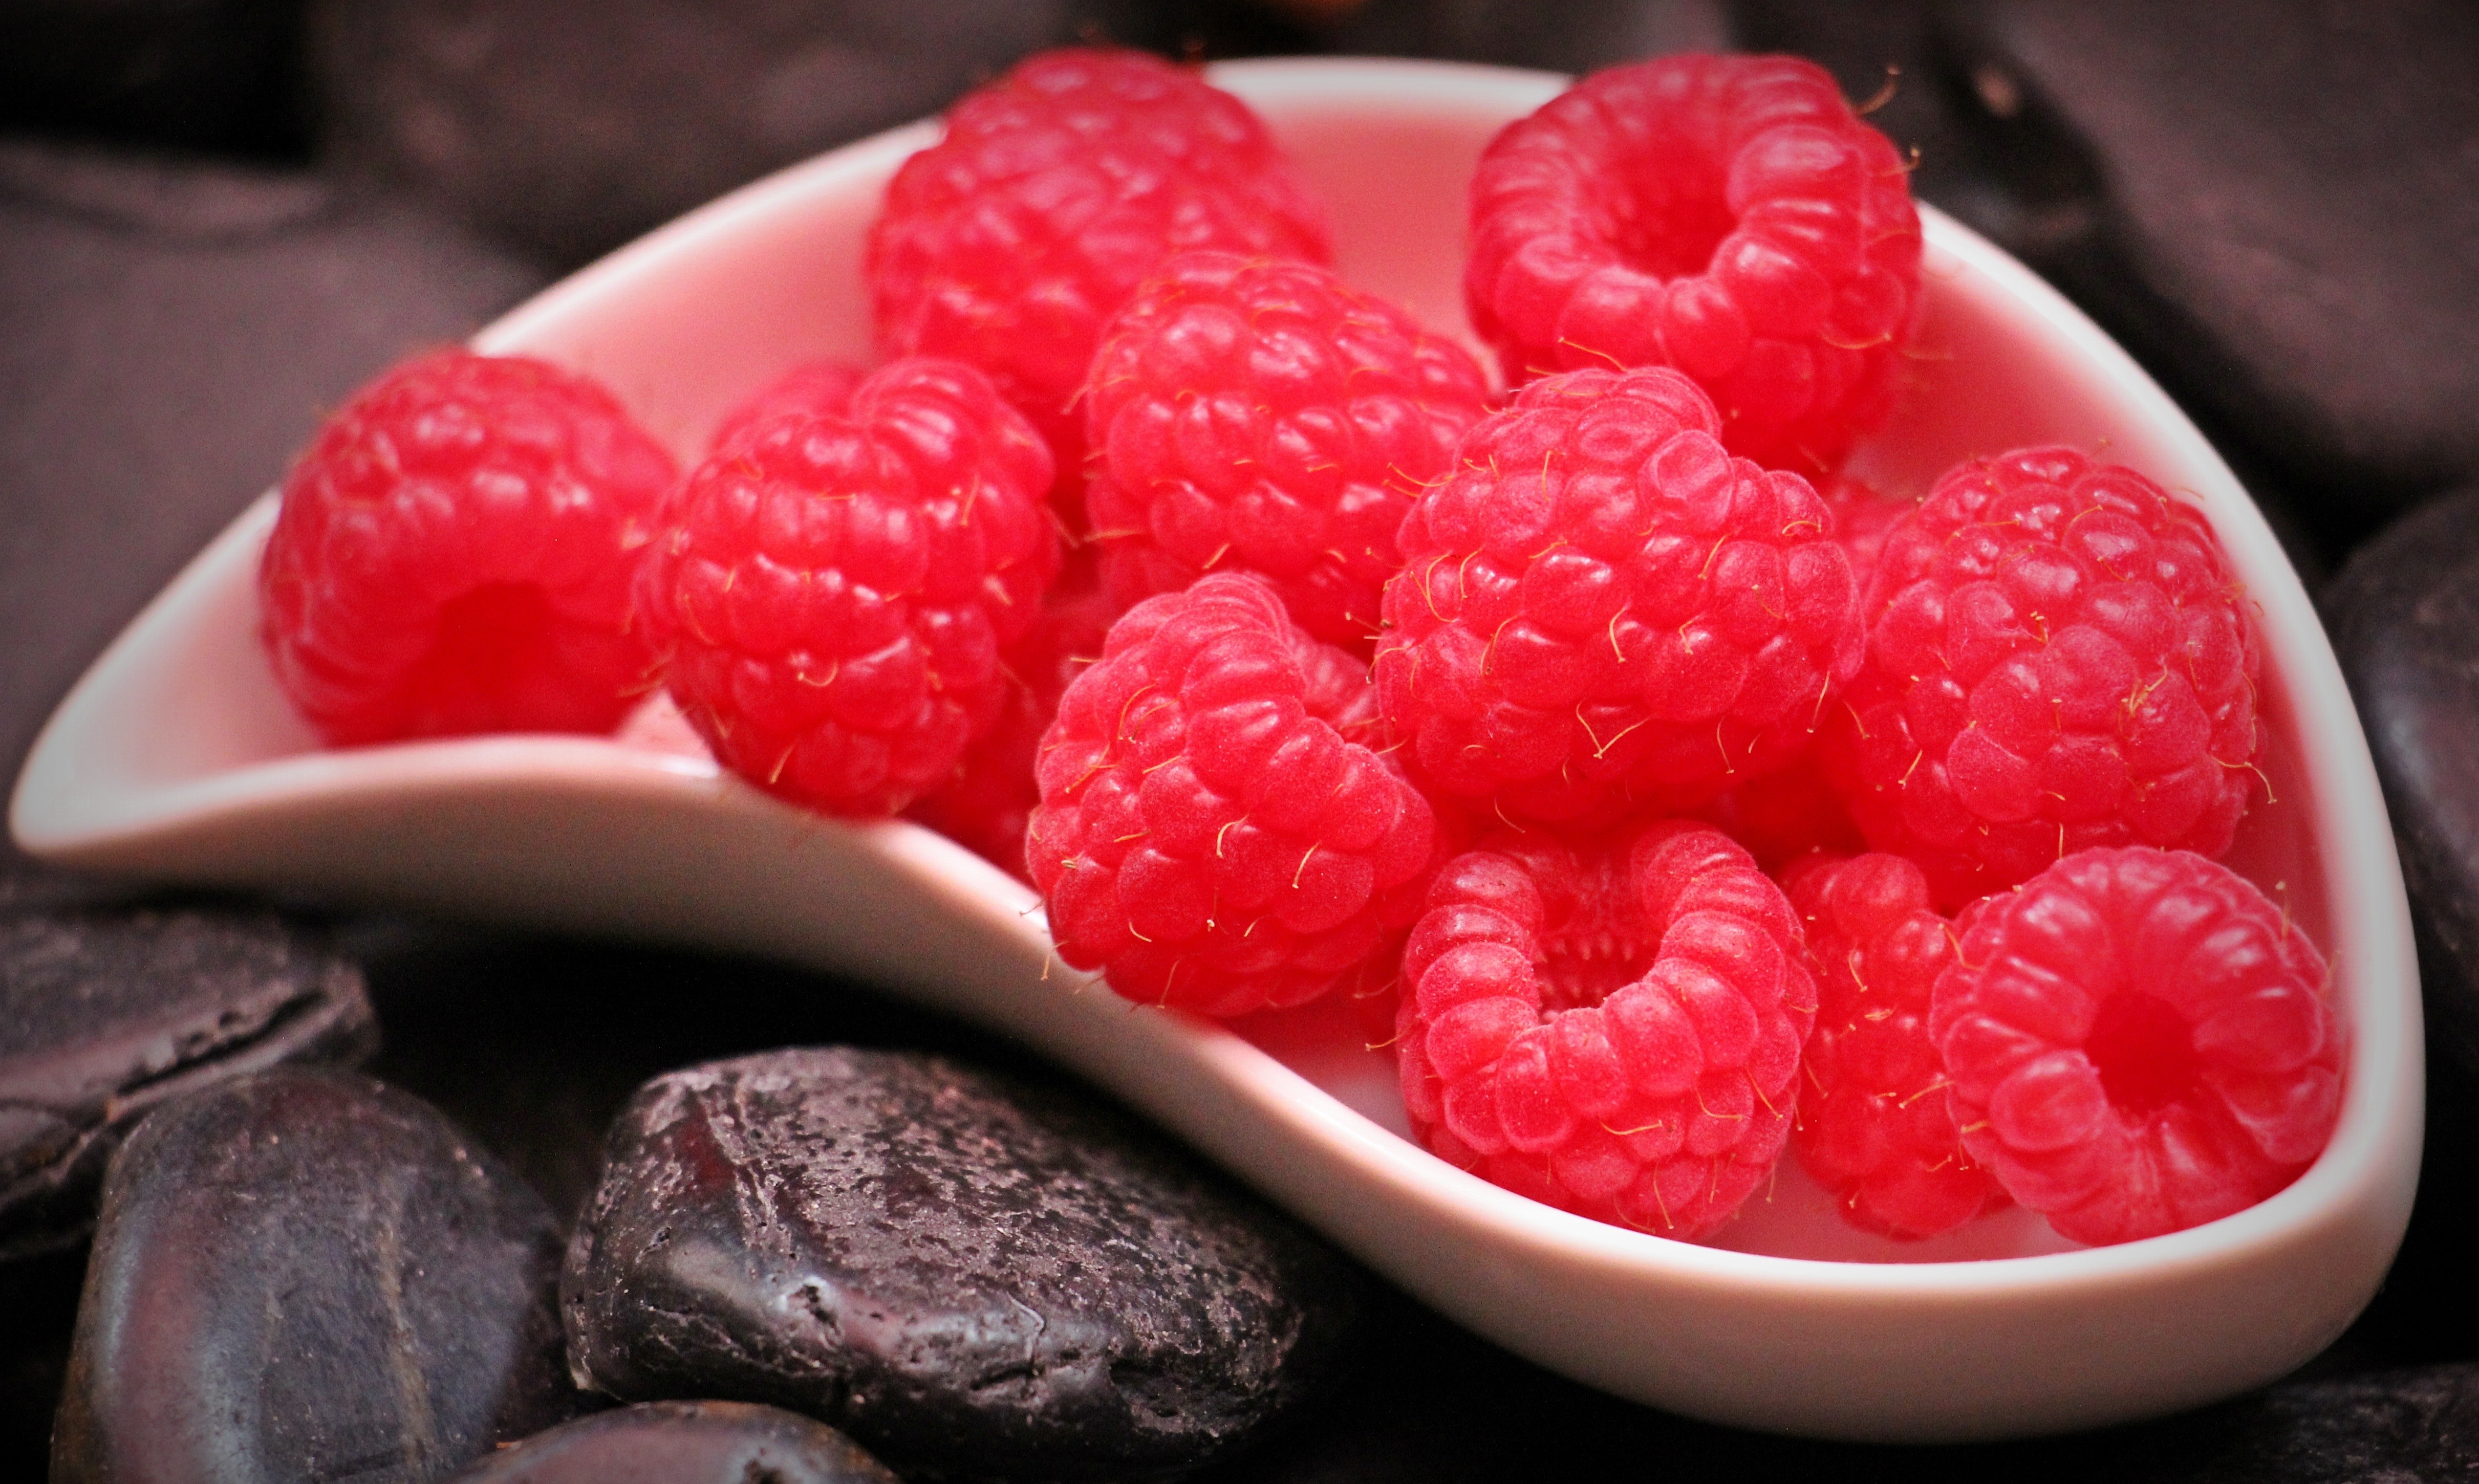 Red Raspberry Fruit on White Ceramic Tray, Berry, Plate, Tasty, Sweet, HQ Photo